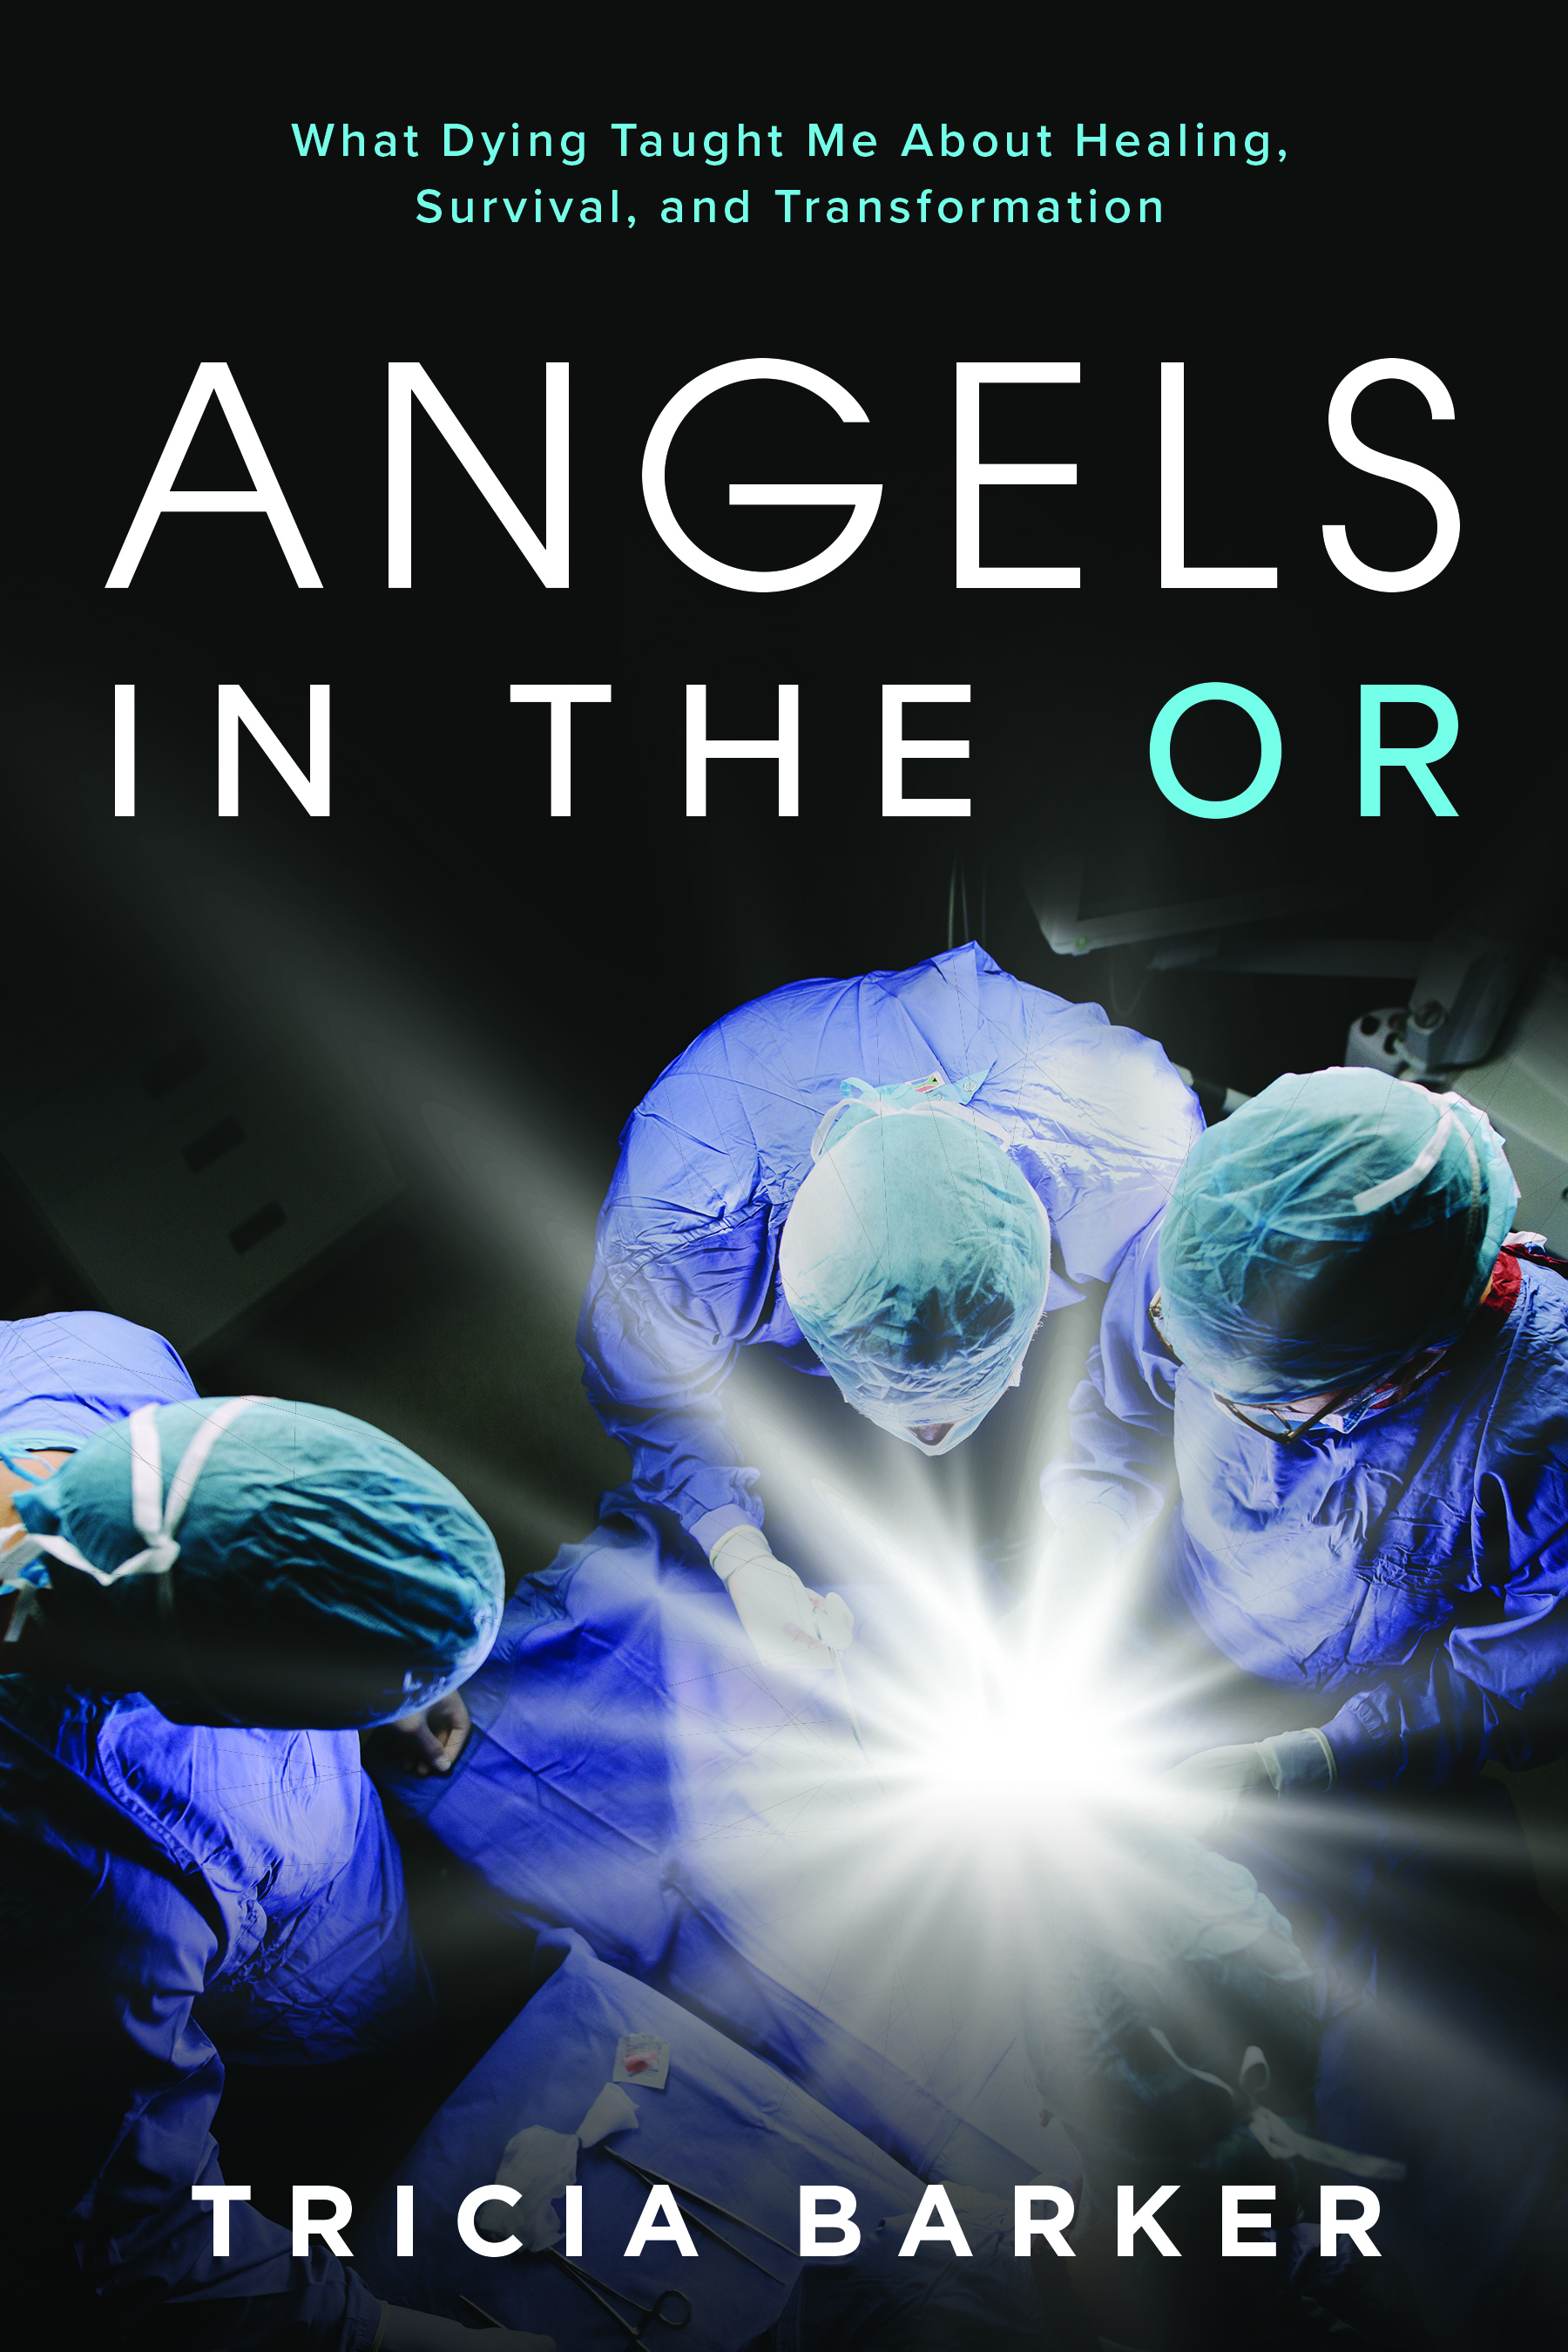 Angels-In-The-OR-Cover_v1